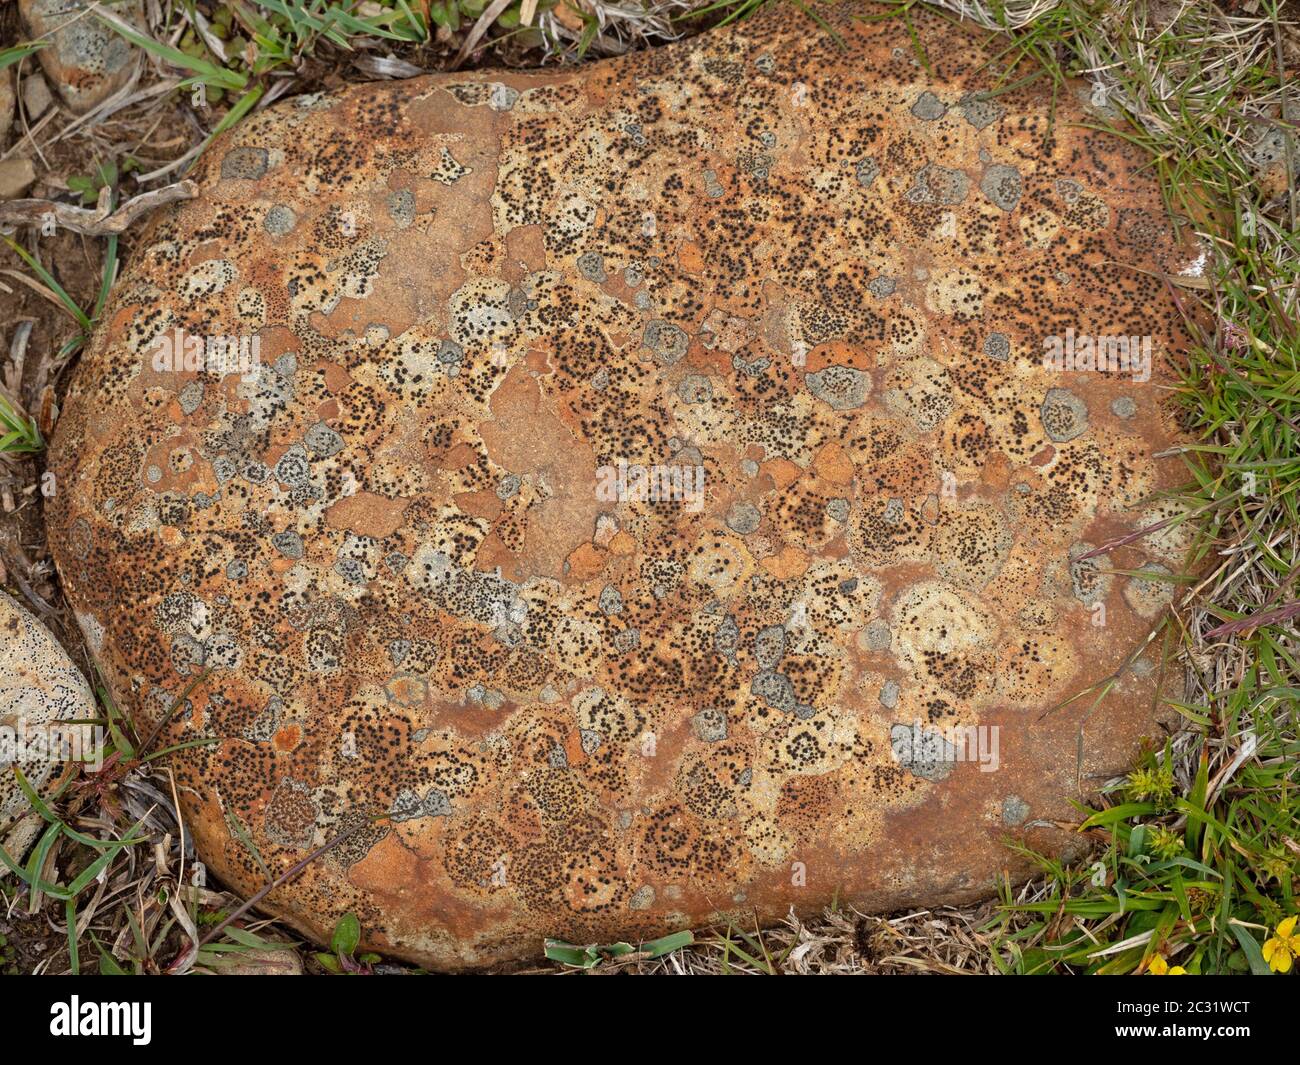 smooth rounded brown rock decorated with delicate natural patterns of concentric lichens that resemble detailed artwork in Cumbria, England, UK Stock Photo